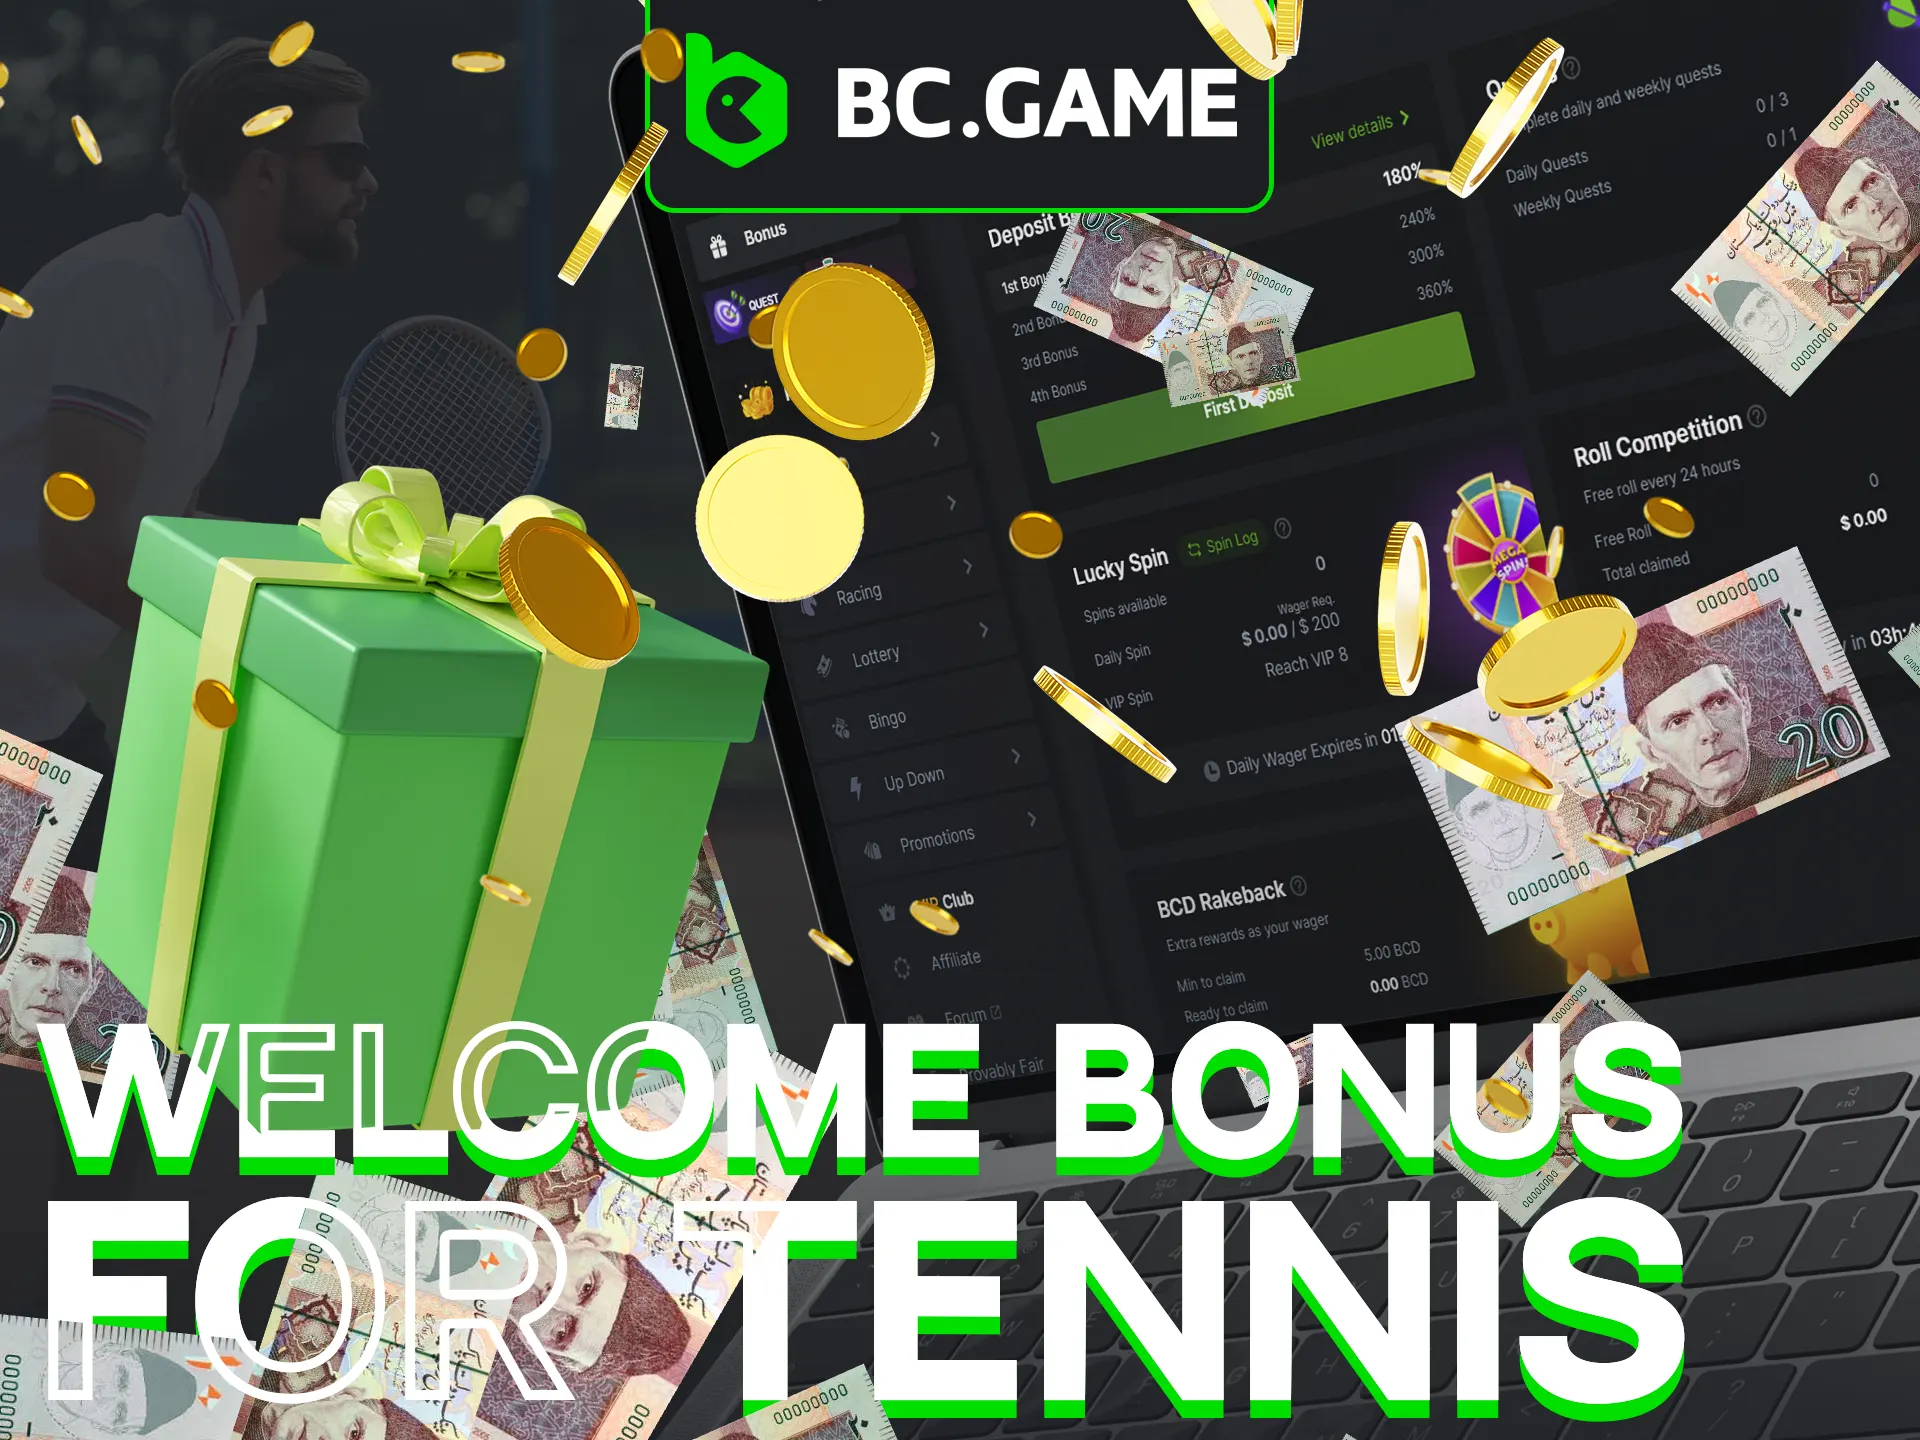 BC Game offers welcome bonuses for tennis betting on deposits.